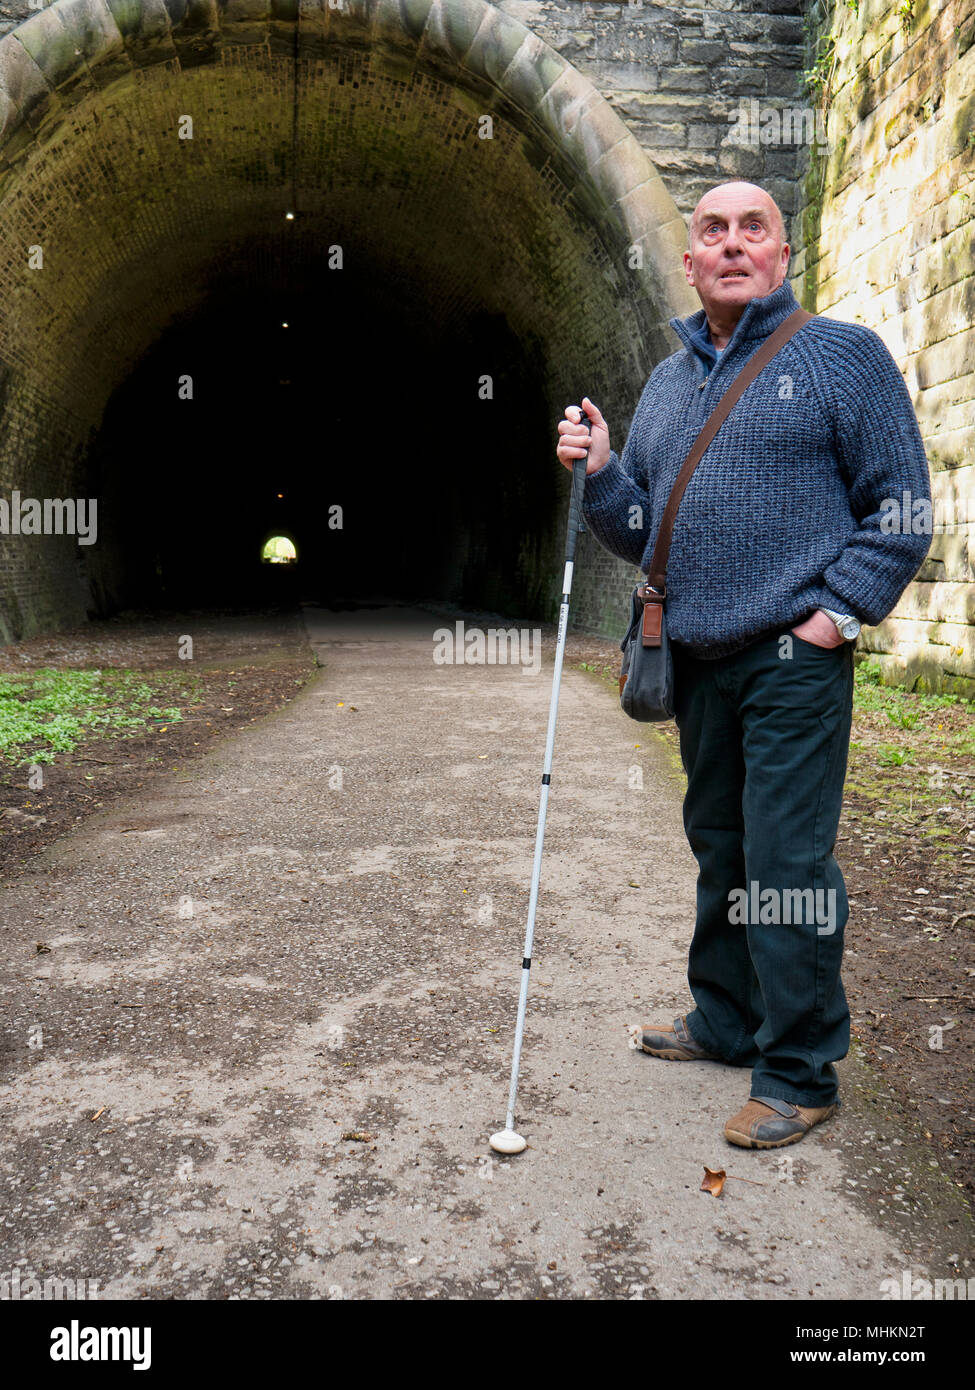 Ashbourne, UK. 2nd May, 2018. Blind British Armed Forces veteran Simon Mahoney at the entrance to Tissington Tunnel, Ashbourne, ahead of his book launch 'Descent into Darkness' which he wrote as an insight to the thousands who have & are losing their sight, their carers and professionals working in the eye care field. Credit: Doug Blane/Alamy Live News Stock Photo